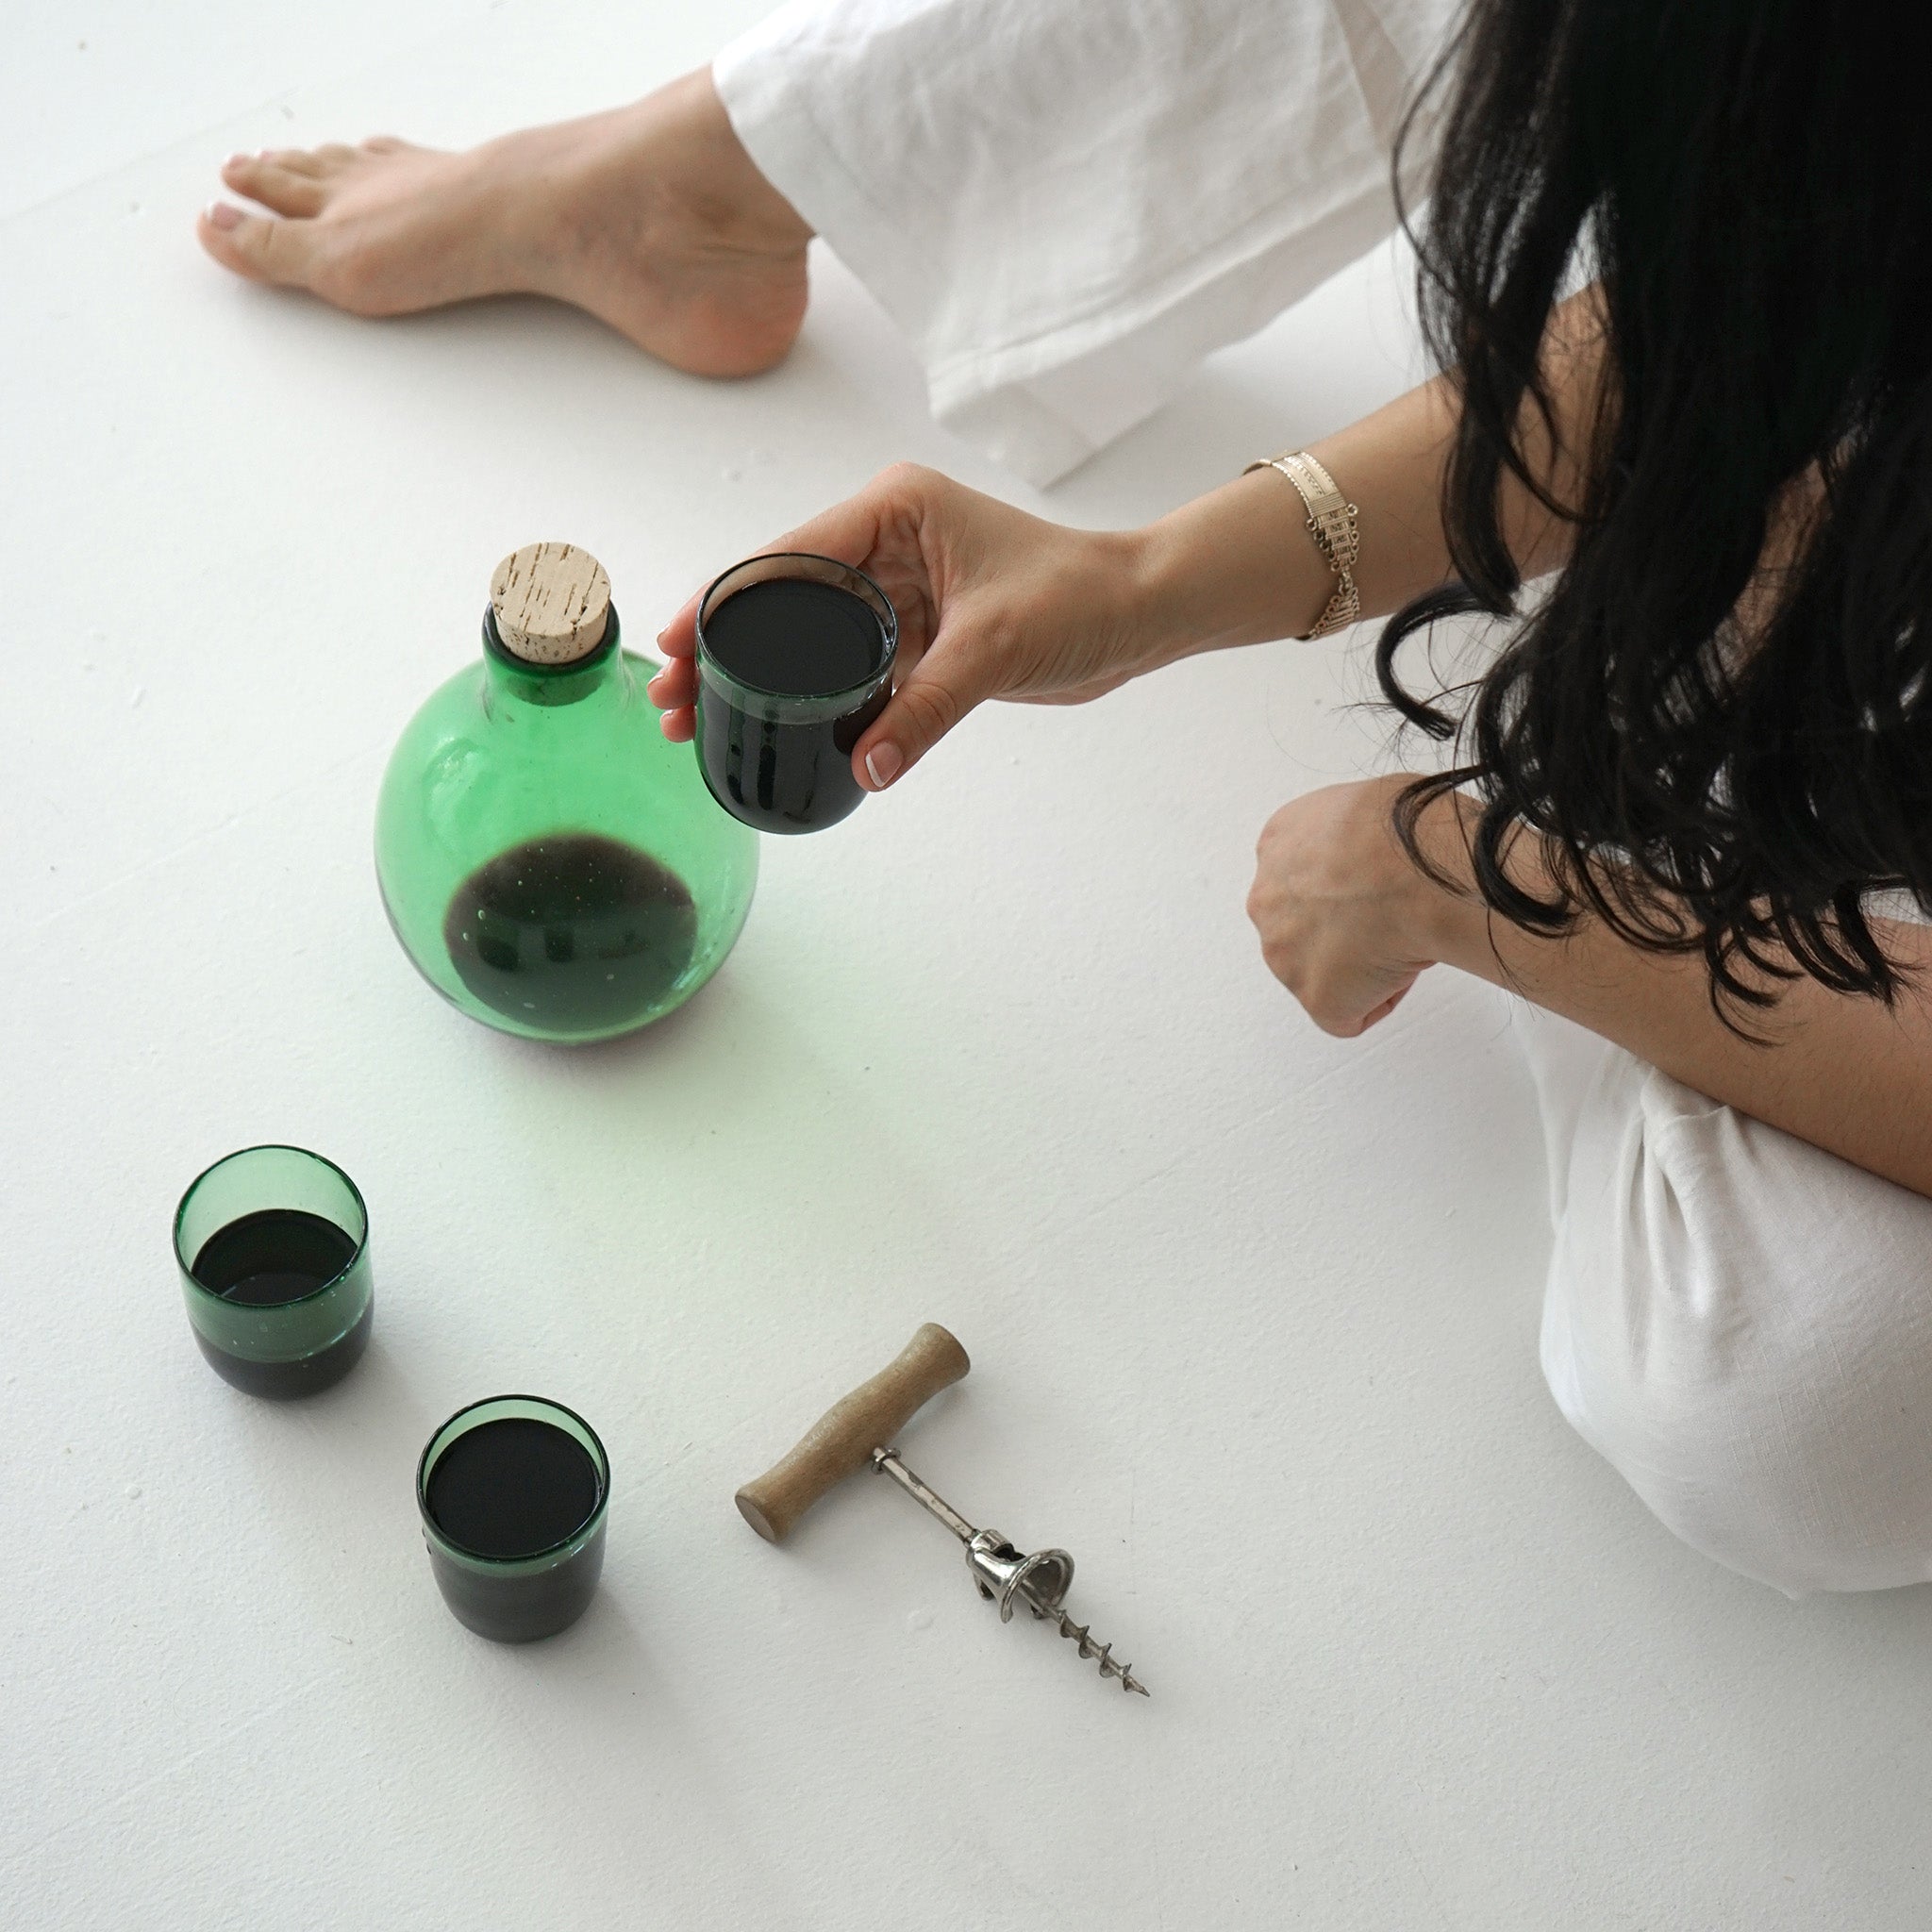 Woman holding a clear green glass cup with the matching pitcher and cup sitting on the floor next to her